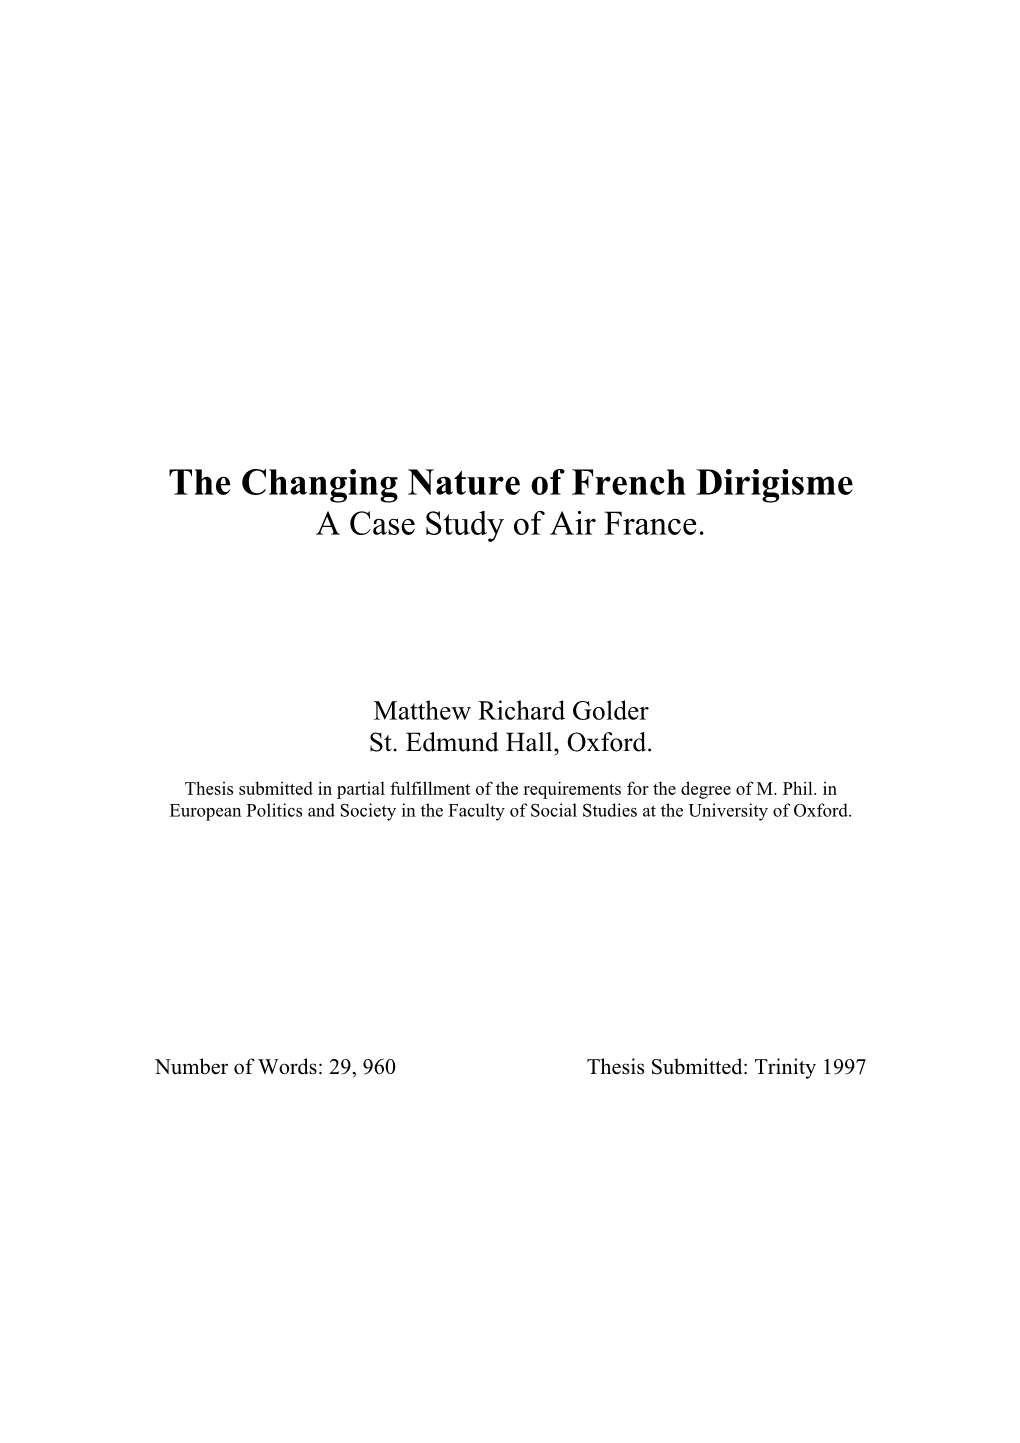 The Changing Nature of French Dirigisme: a Case Study of Air France